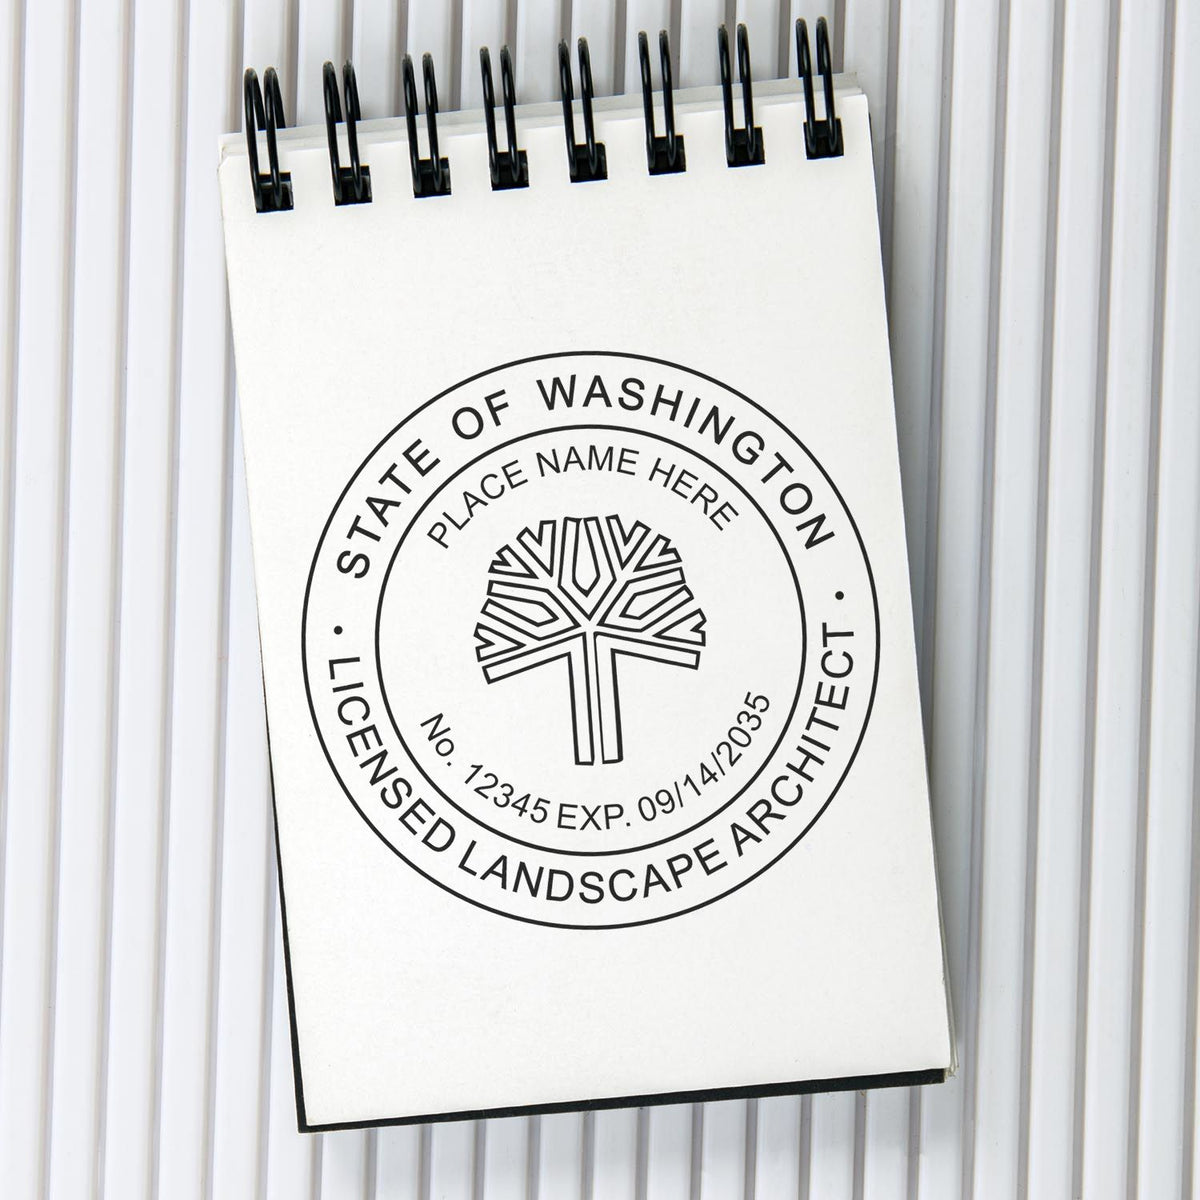 A photograph of the Self-Inking Washington Landscape Architect Stamp stamp impression reveals a vivid, professional image of the on paper.